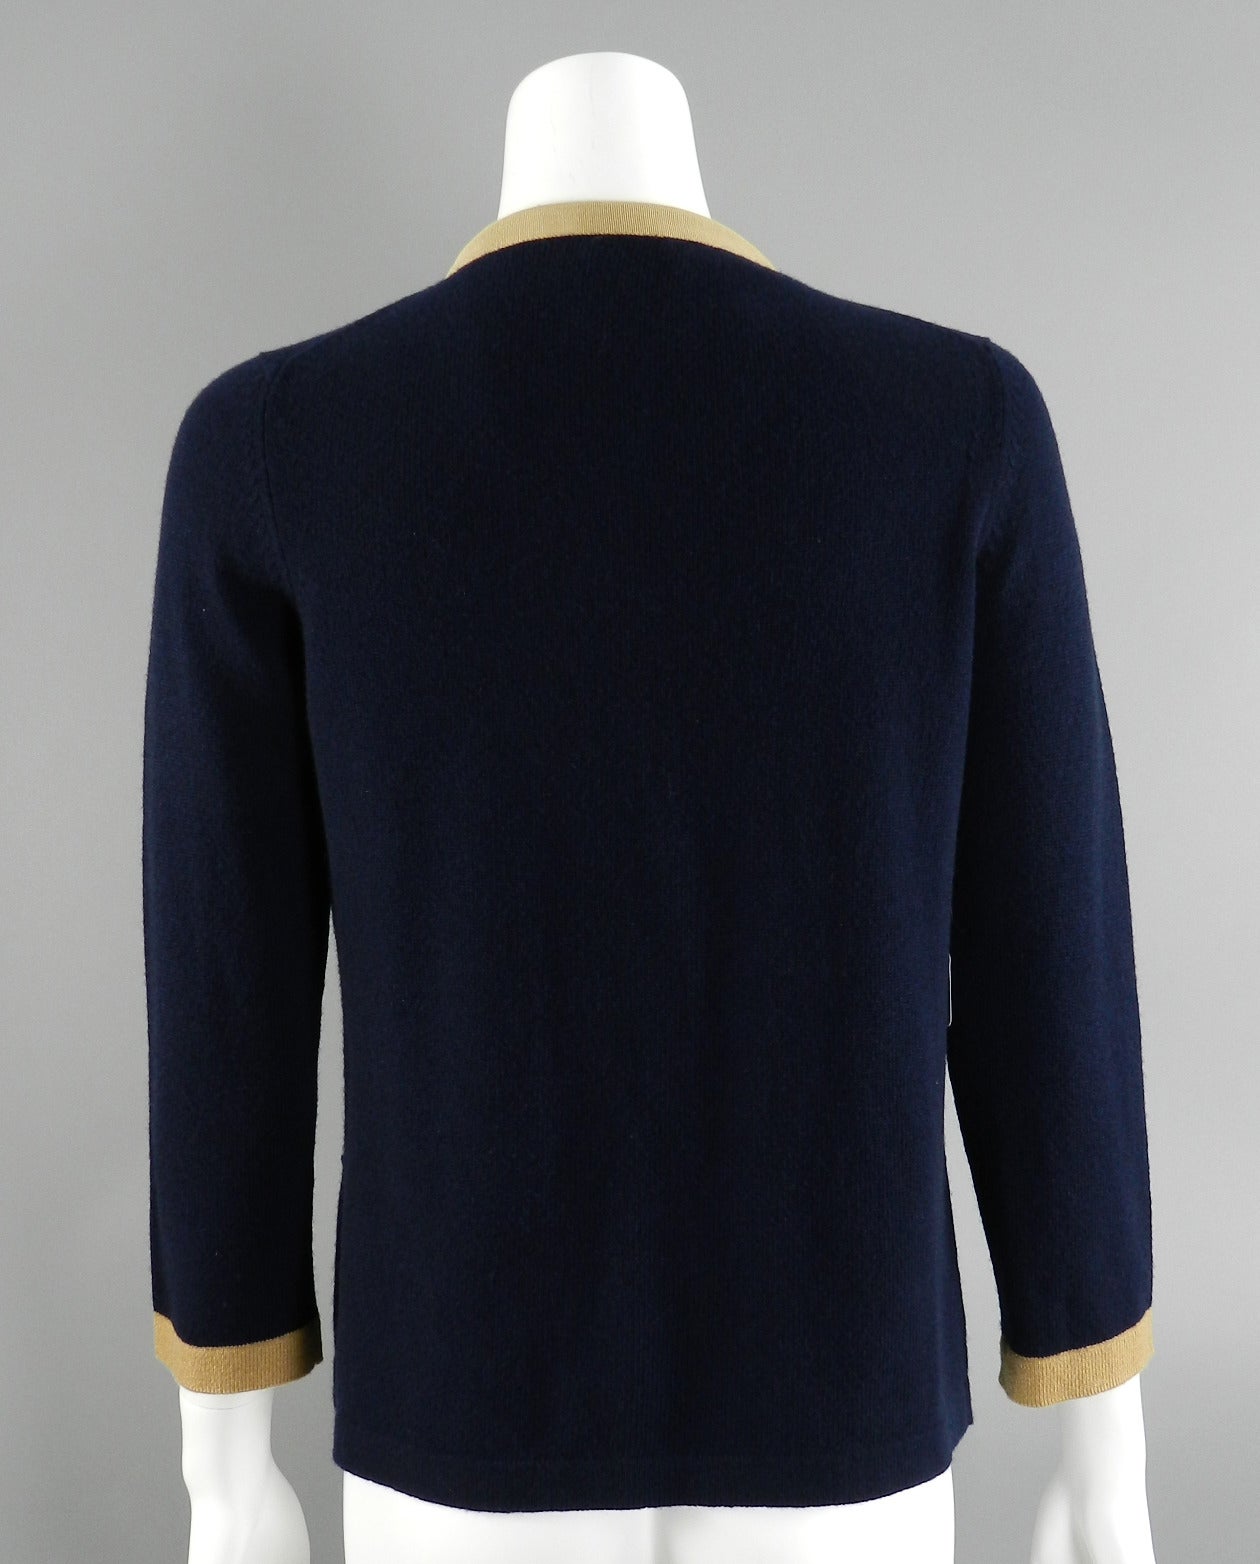 Women's Chanel 11P Navy Cashmere Cardigan with Gold Chain